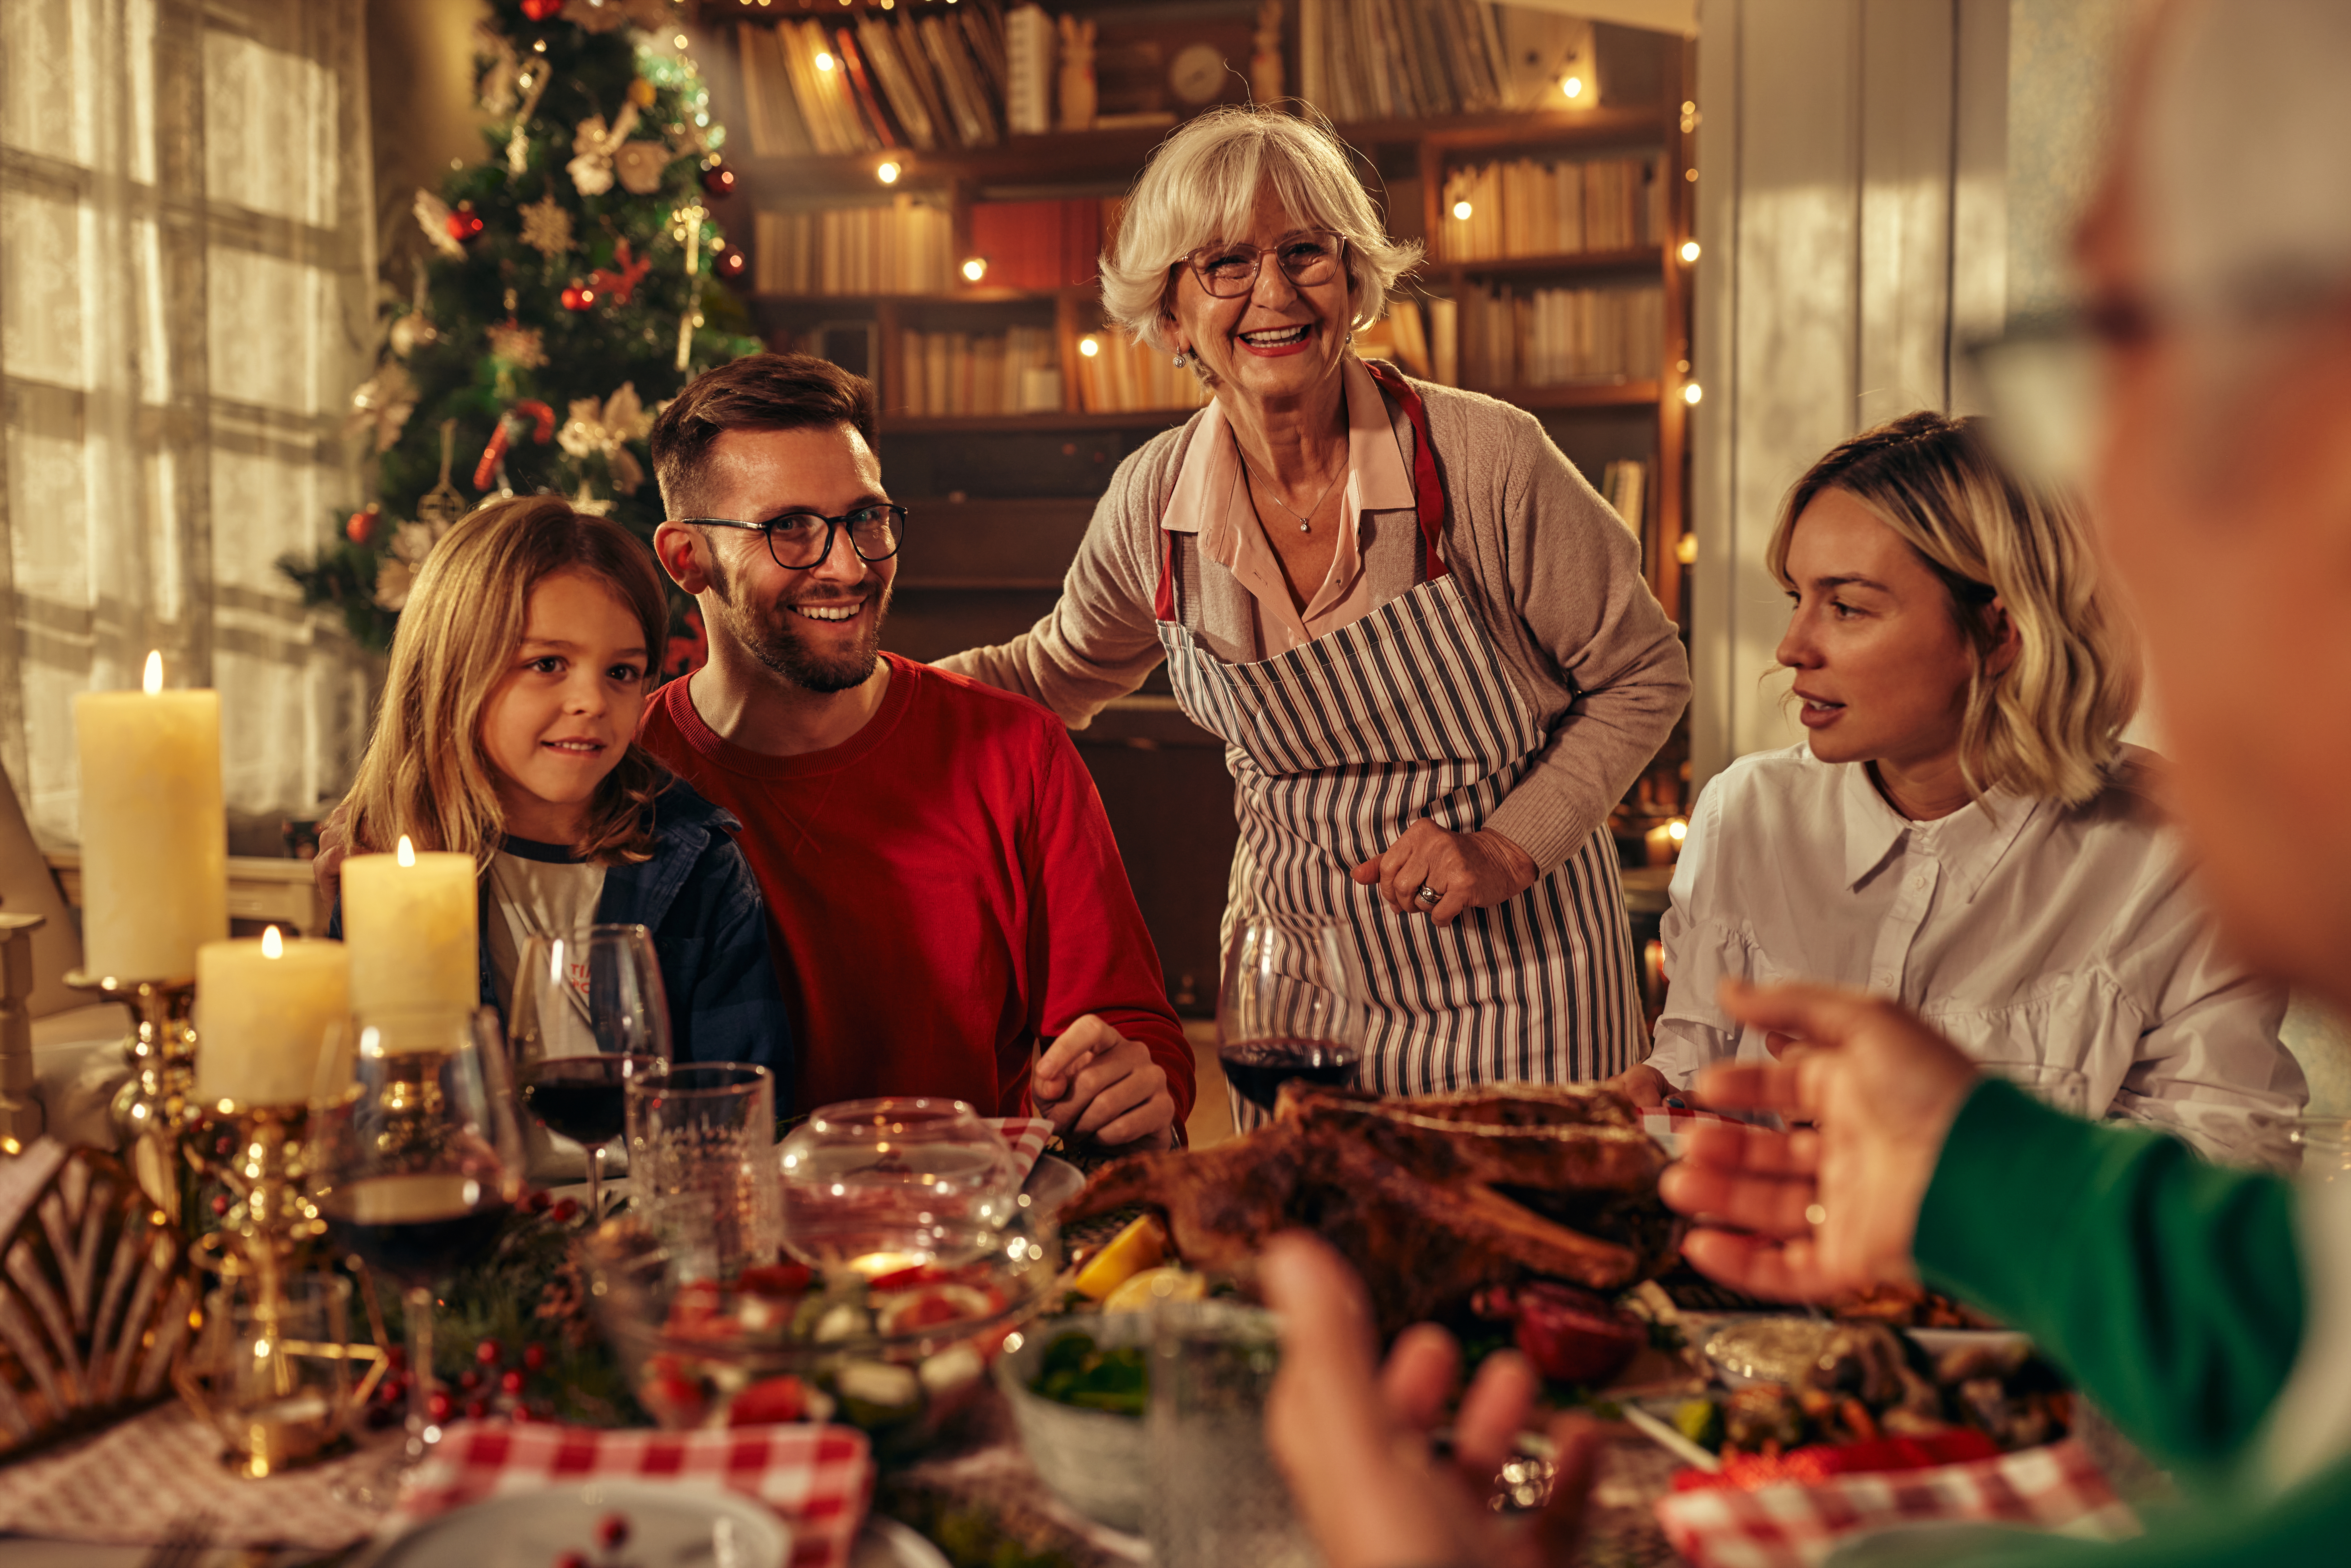 Family members gathered at a Christmas supper party | Source: Shutterstock